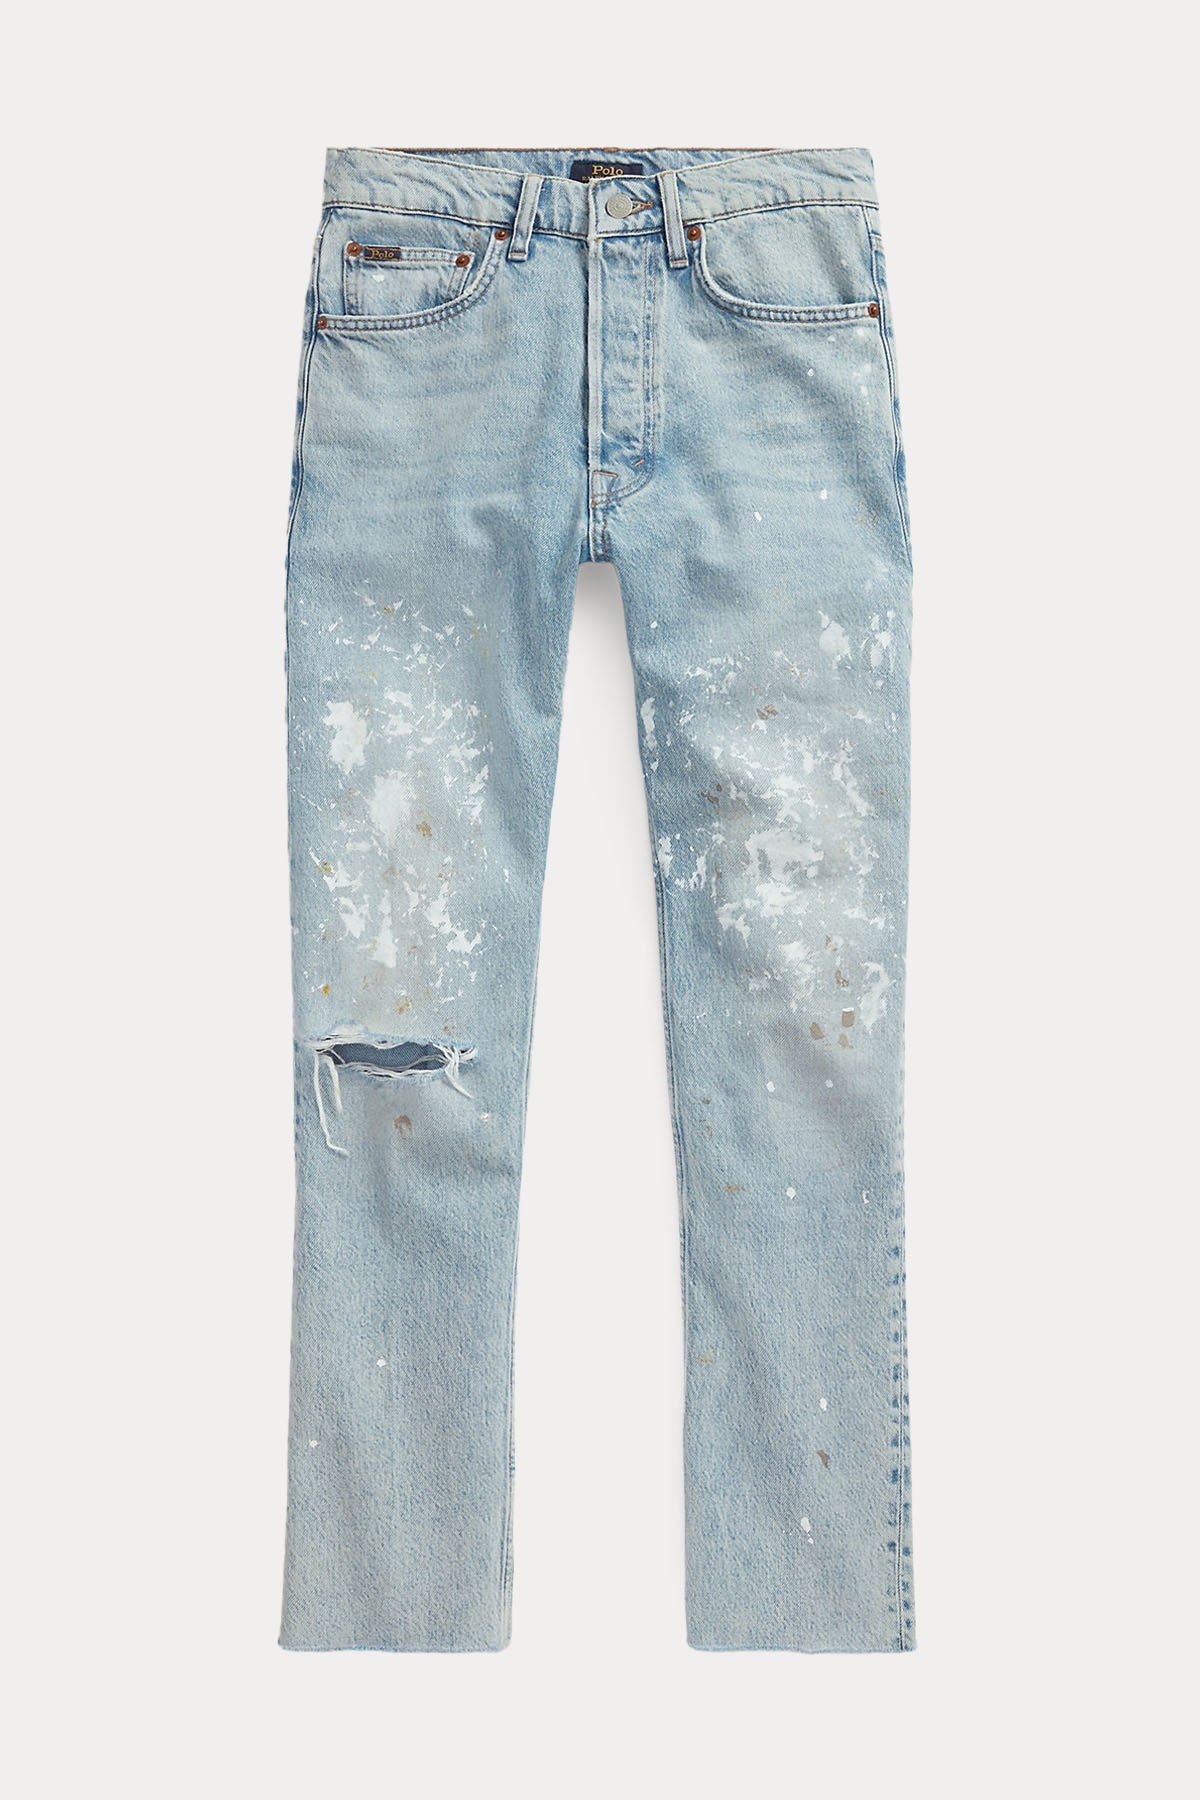 Polo Ralph Lauren The Straight Leg Cropped Jeans